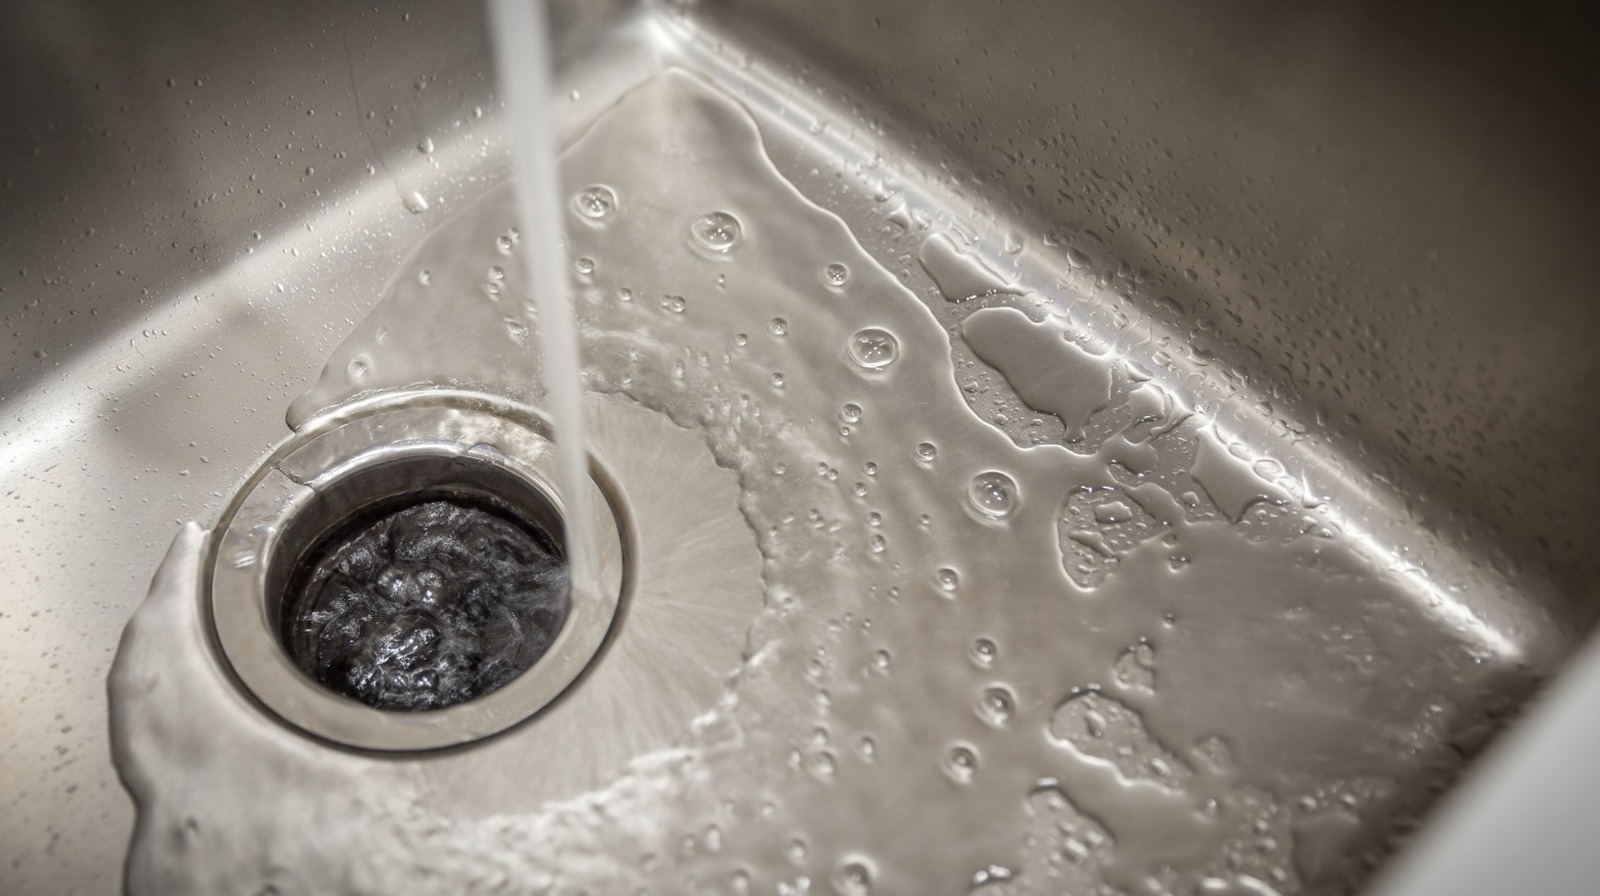 12 Things You Should Never Put in Your Garbage Disposal